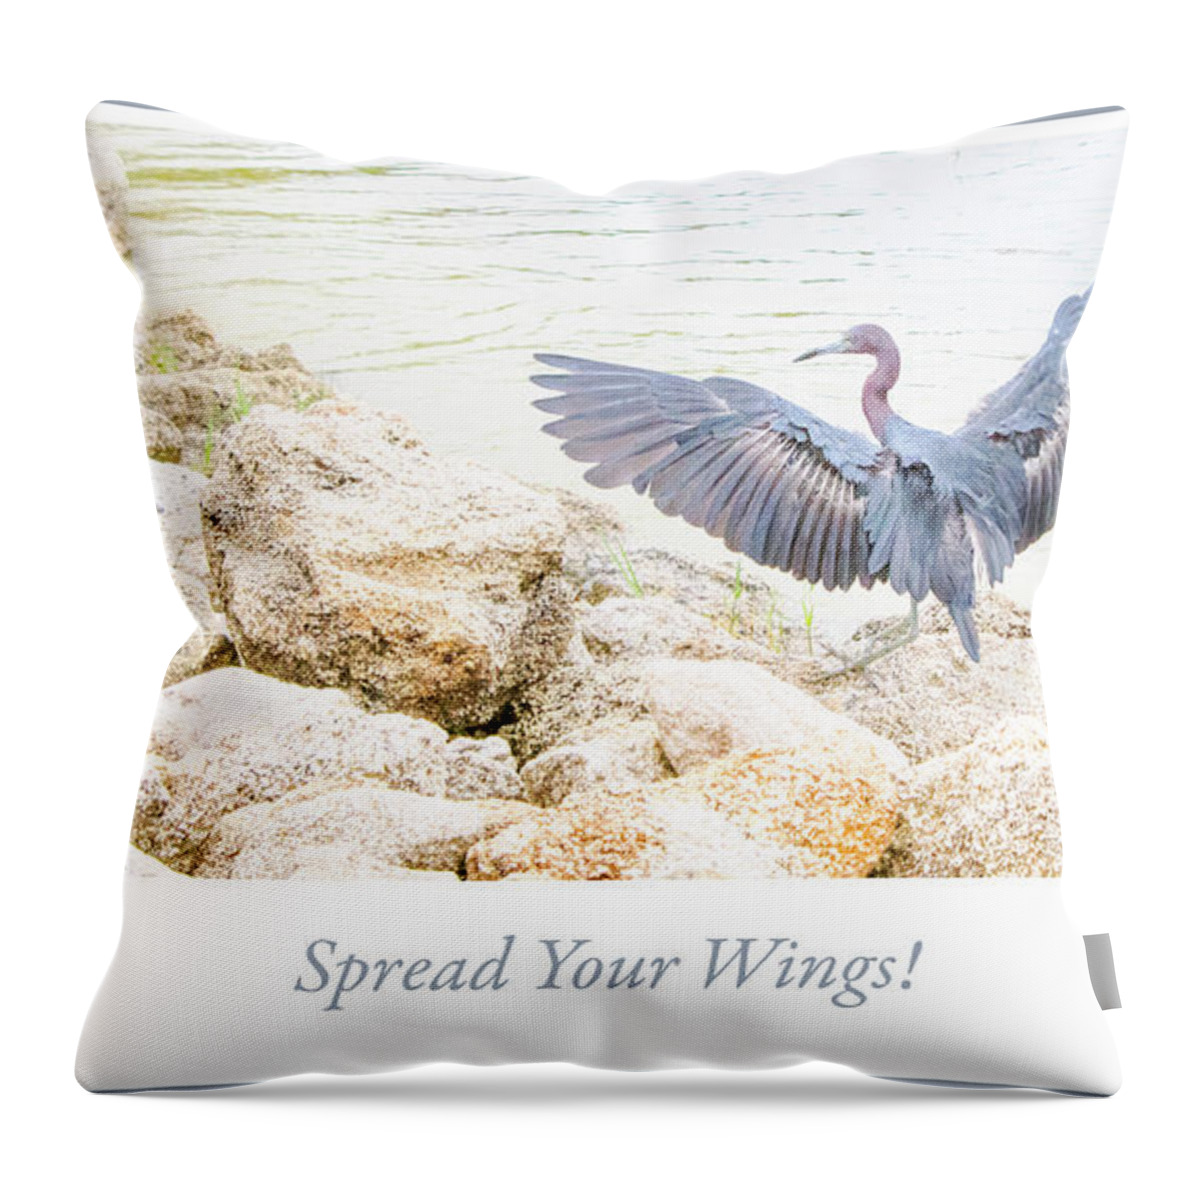 Little Blue Heron Throw Pillow featuring the photograph Little Blue Heron Spreads its Wings by A Macarthur Gurmankin